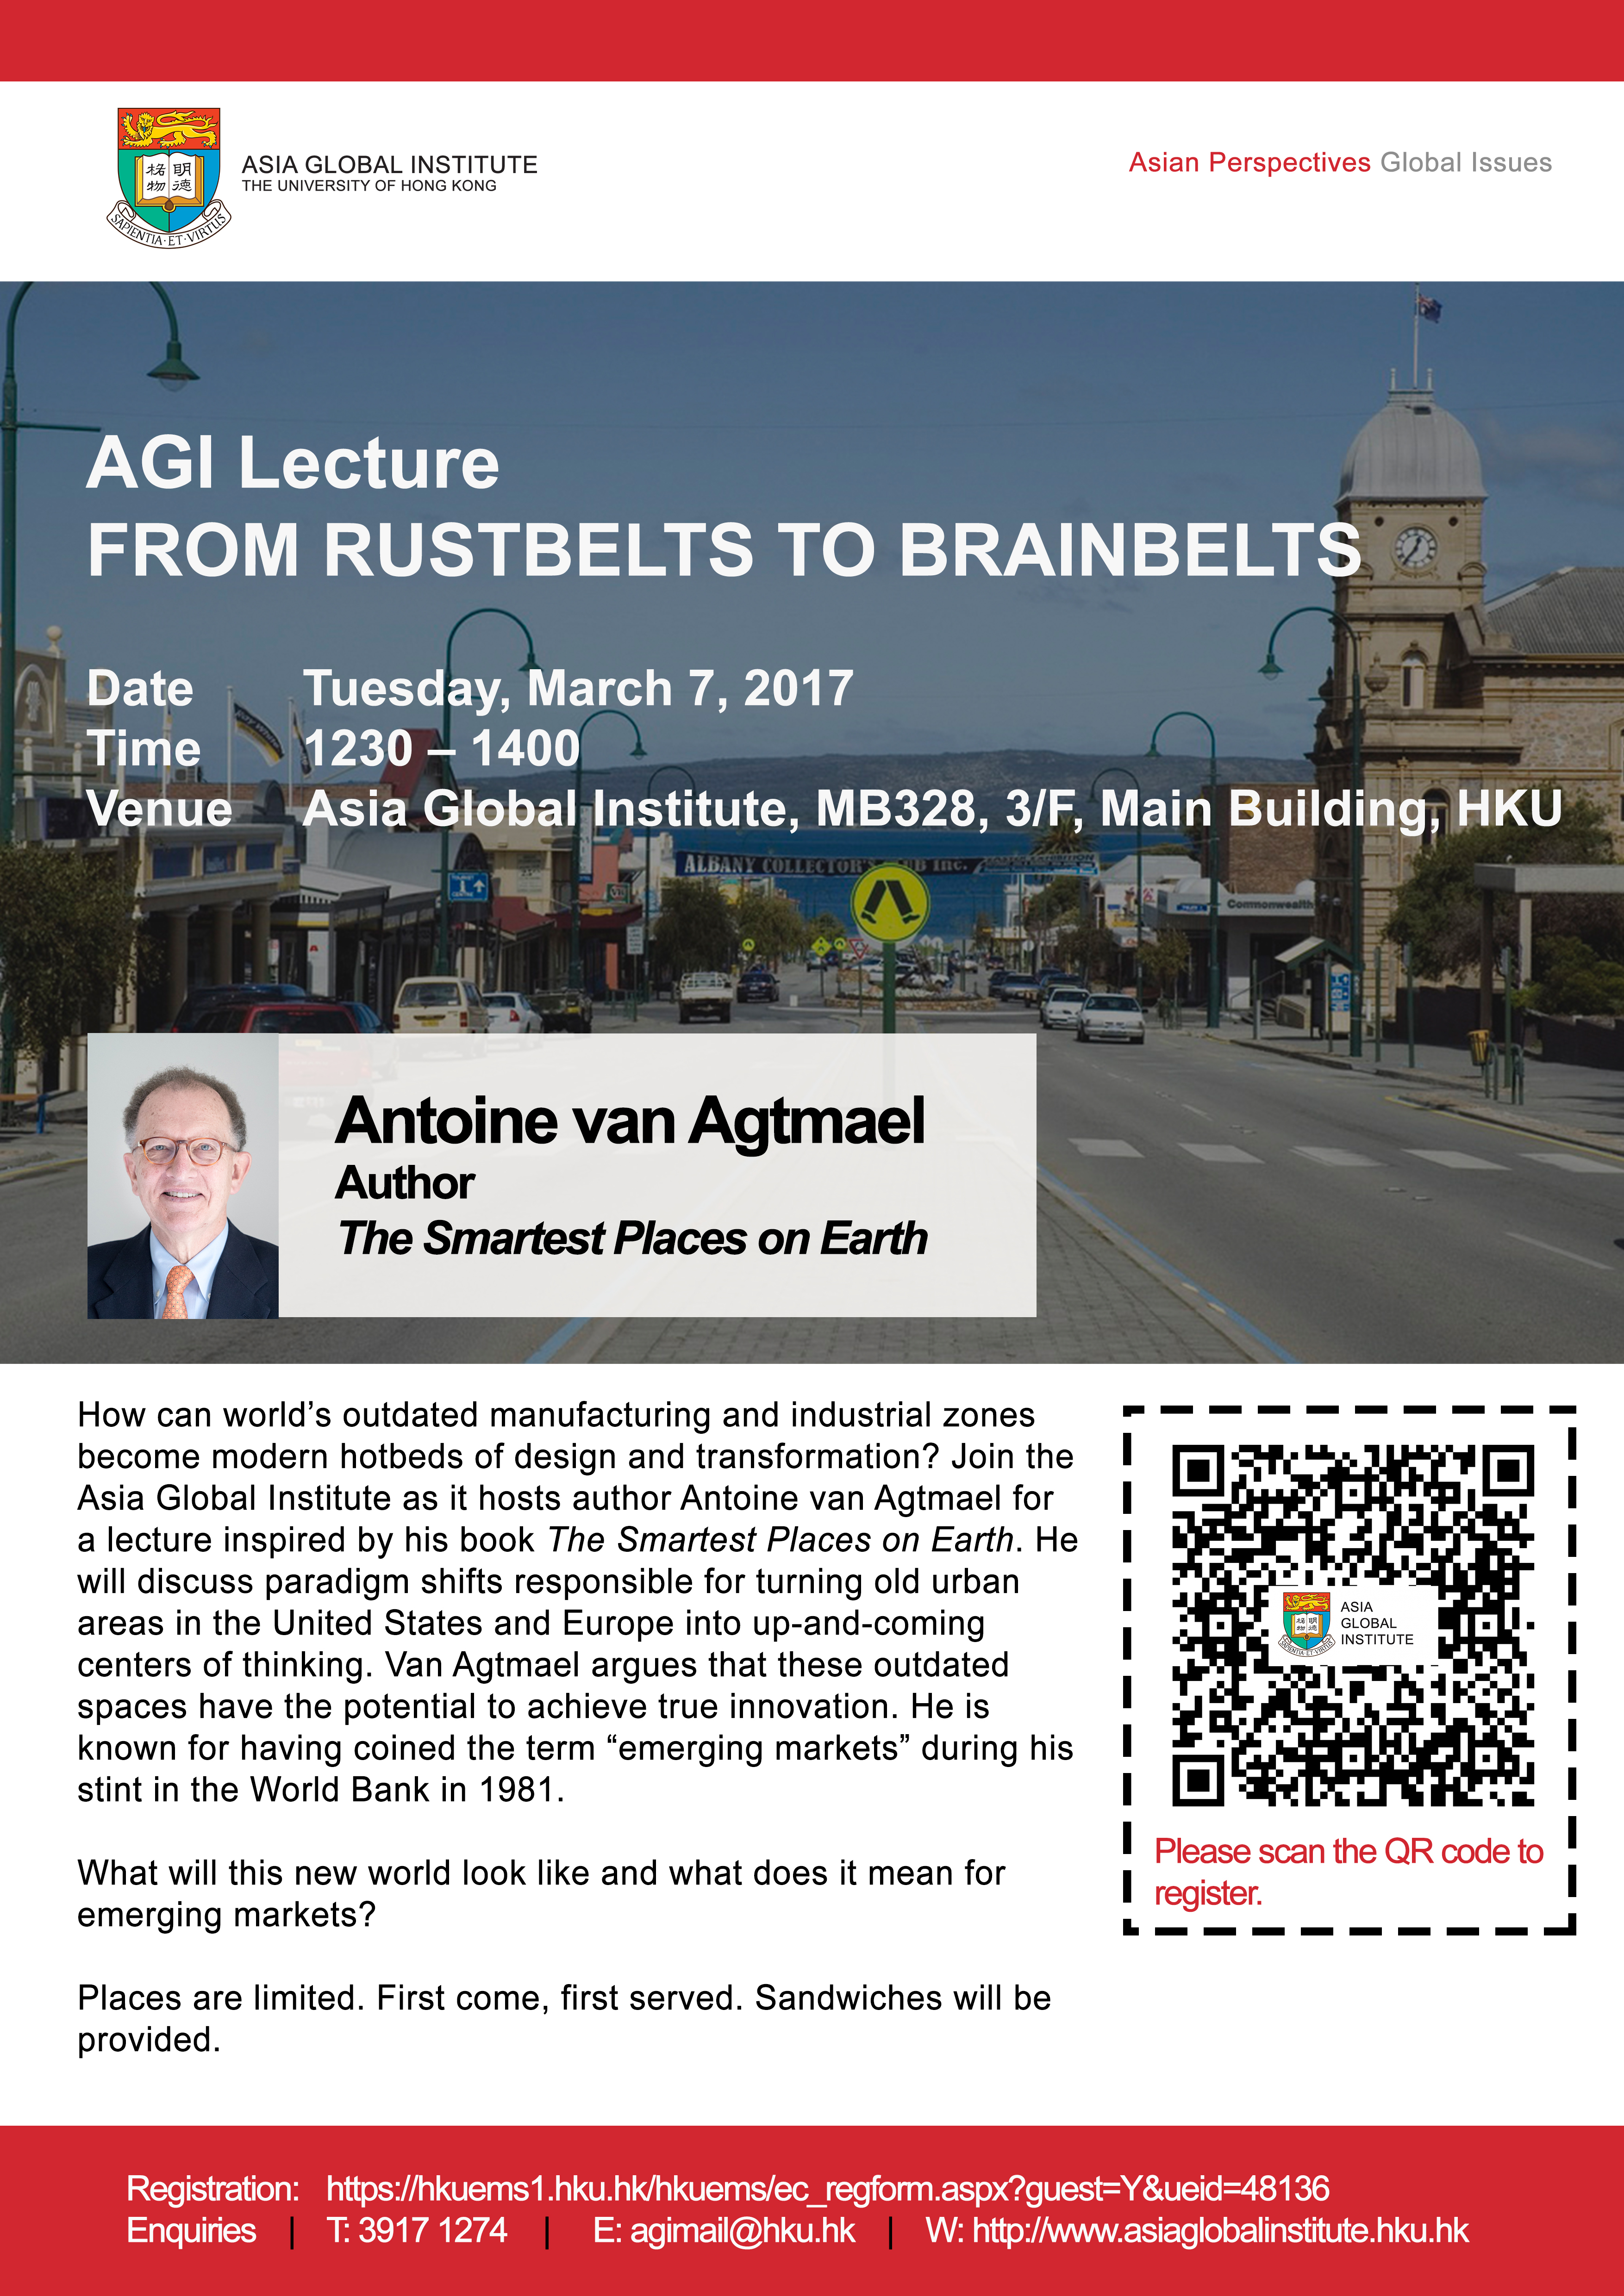 AGI Lecture: From Rustbelts to Brainbelts